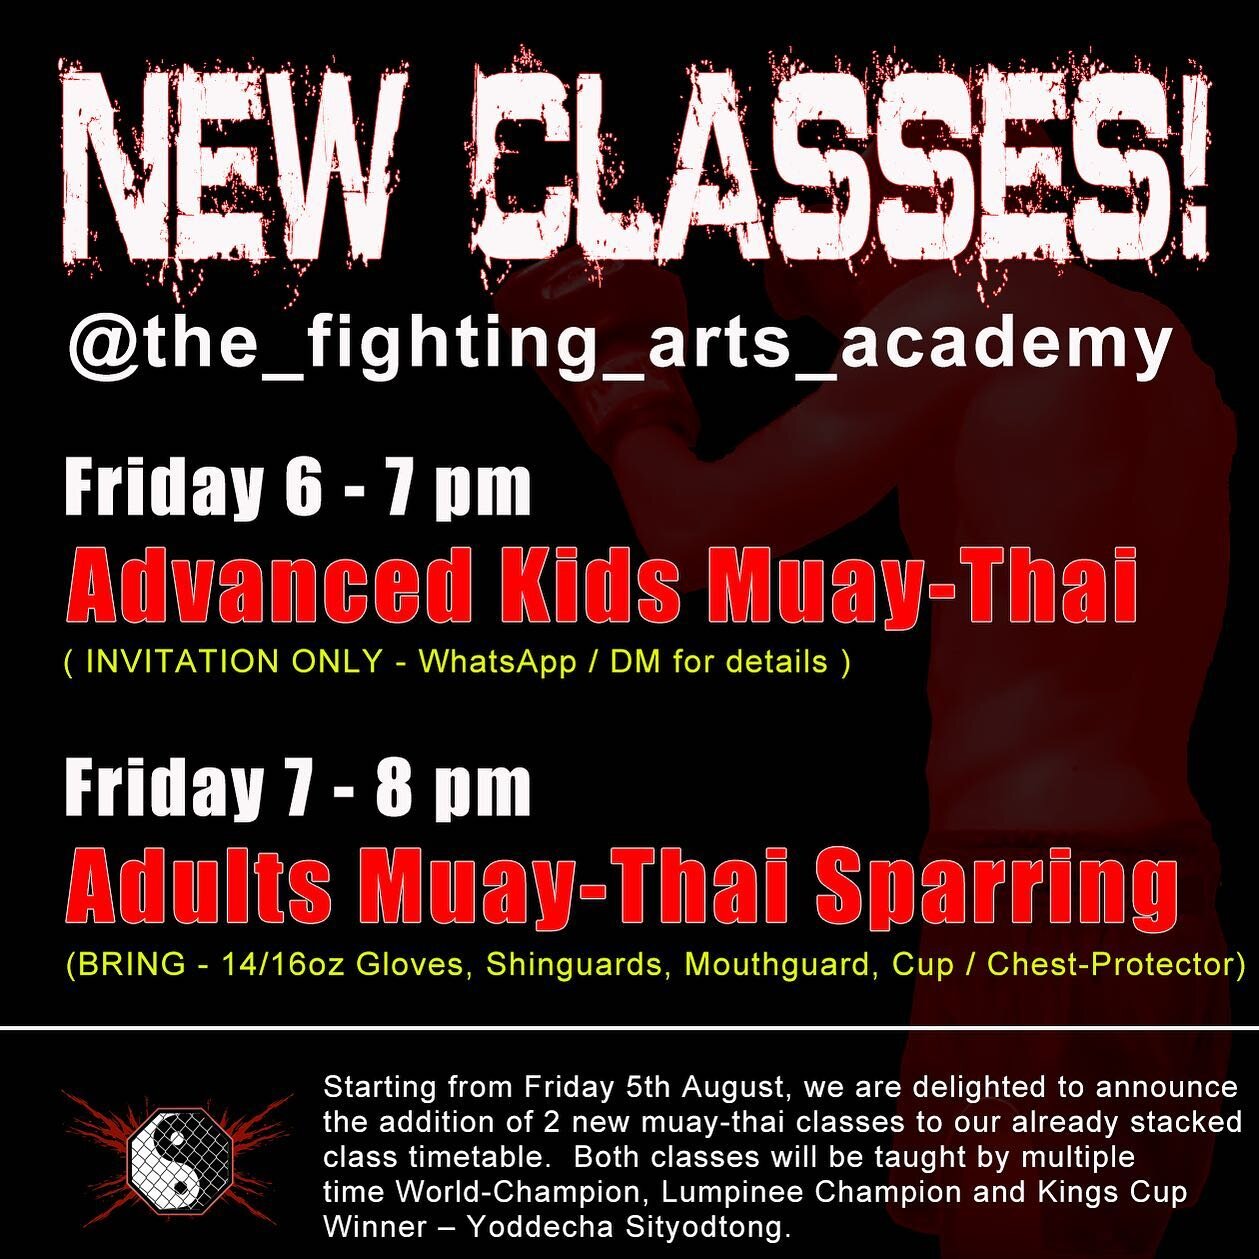 TWO NEW CLASSES @the_fighting_arts_academy 🚀

Advanced #kidsmuaythai

Adults #muaythaisparring 

These new classes are taught by @yoddecha_sityodtong and are running in the space downstairs from Friday 5th August. 

( #nogigrappling with @5050locker